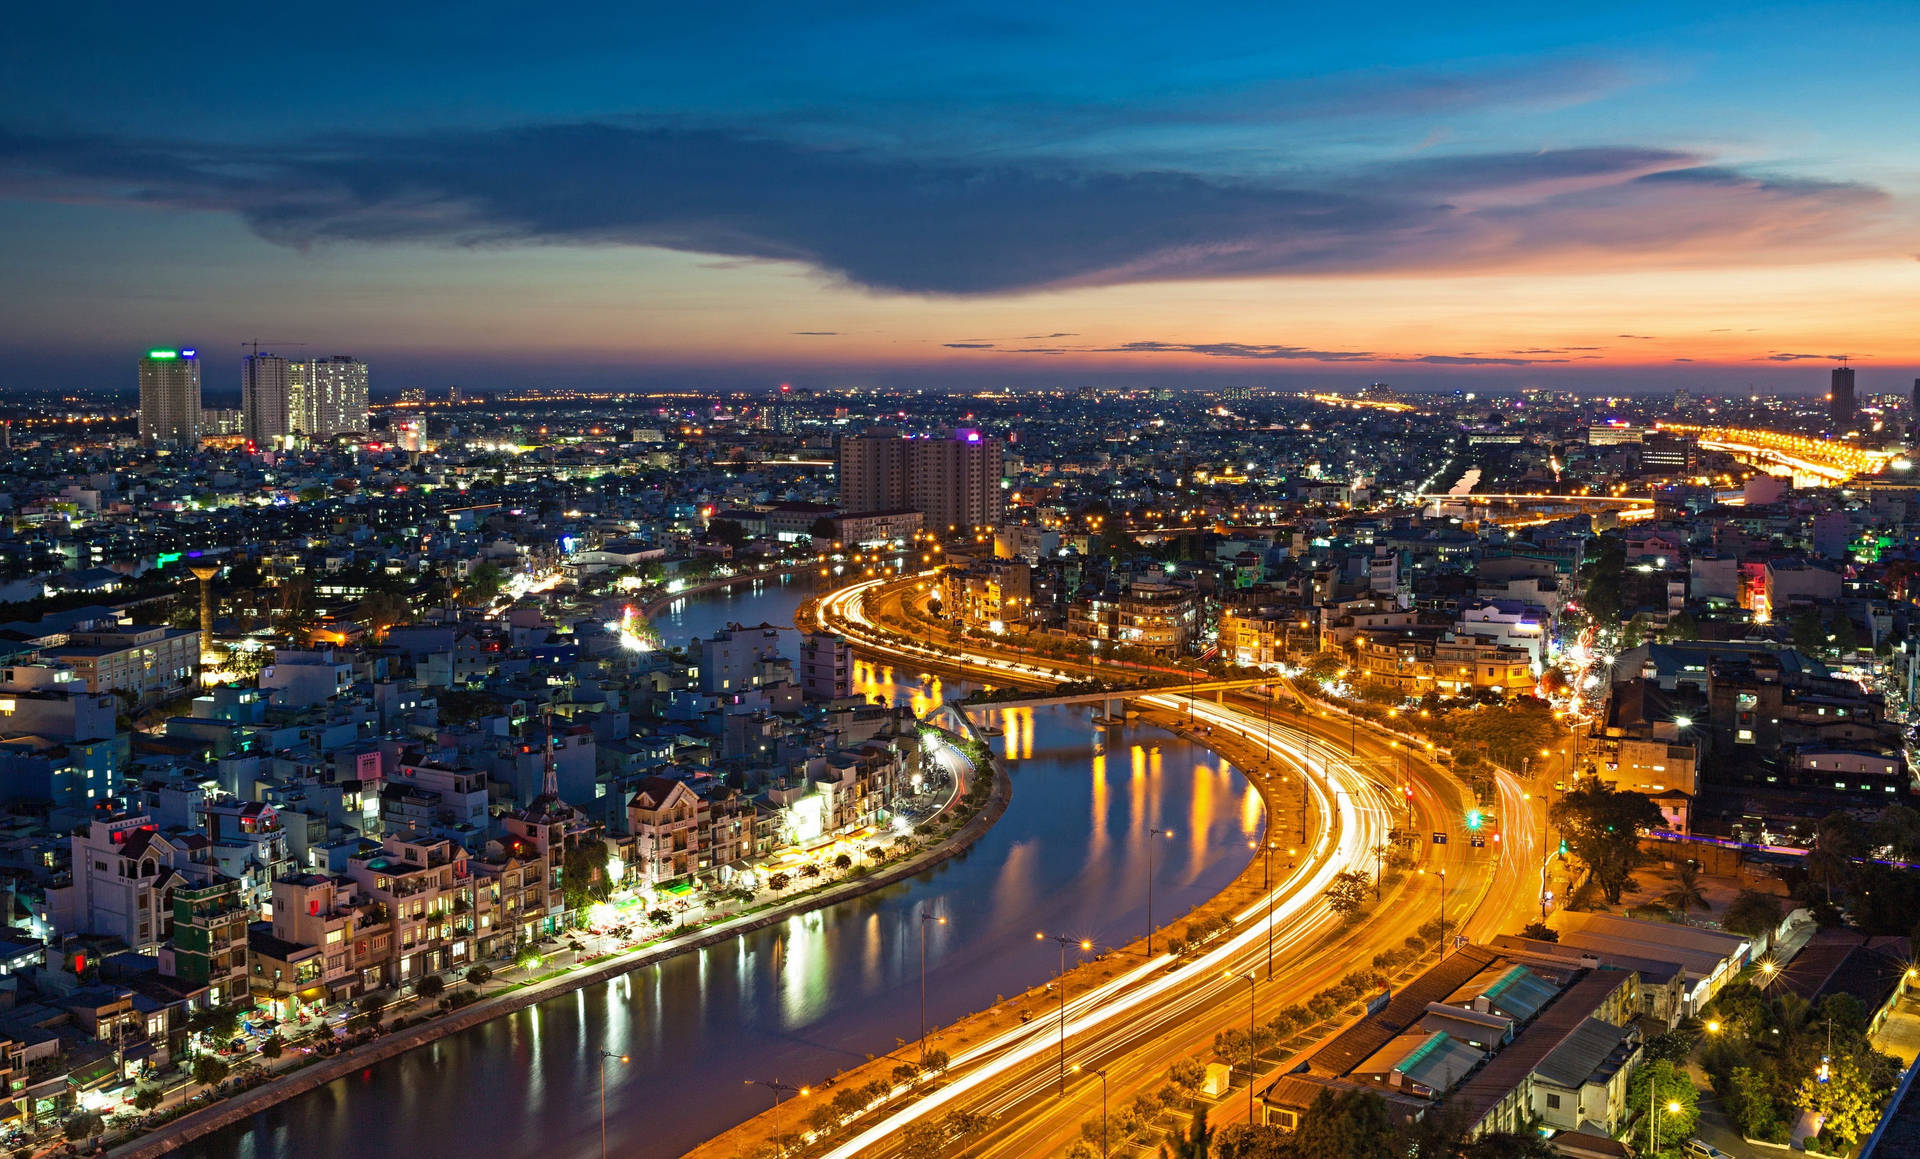 Saigon River And Night City View In Vietnam Background